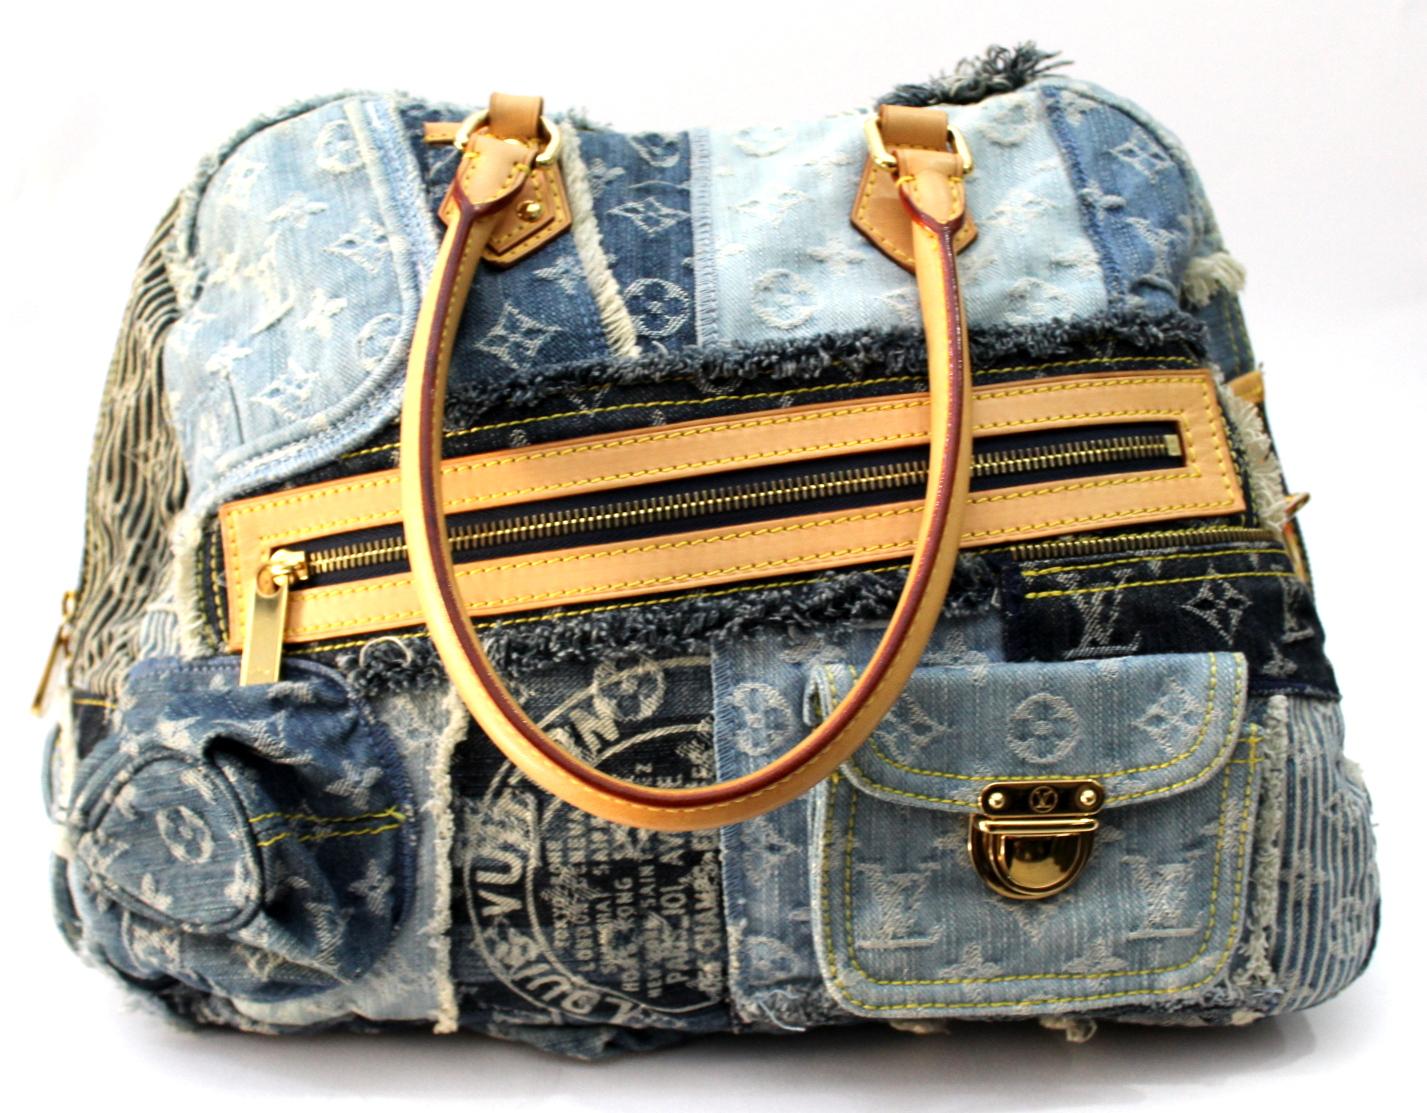 Ultra rare Louis Vuitton Limited Edition Blue Denim Monogram Patchwork Bowly Bag. This is a fun and flirty bag from the Louis Vuitton 2006 Spring/Summer Denim collection and is adored by Louis Vuitton lovers everywhere. It features unique